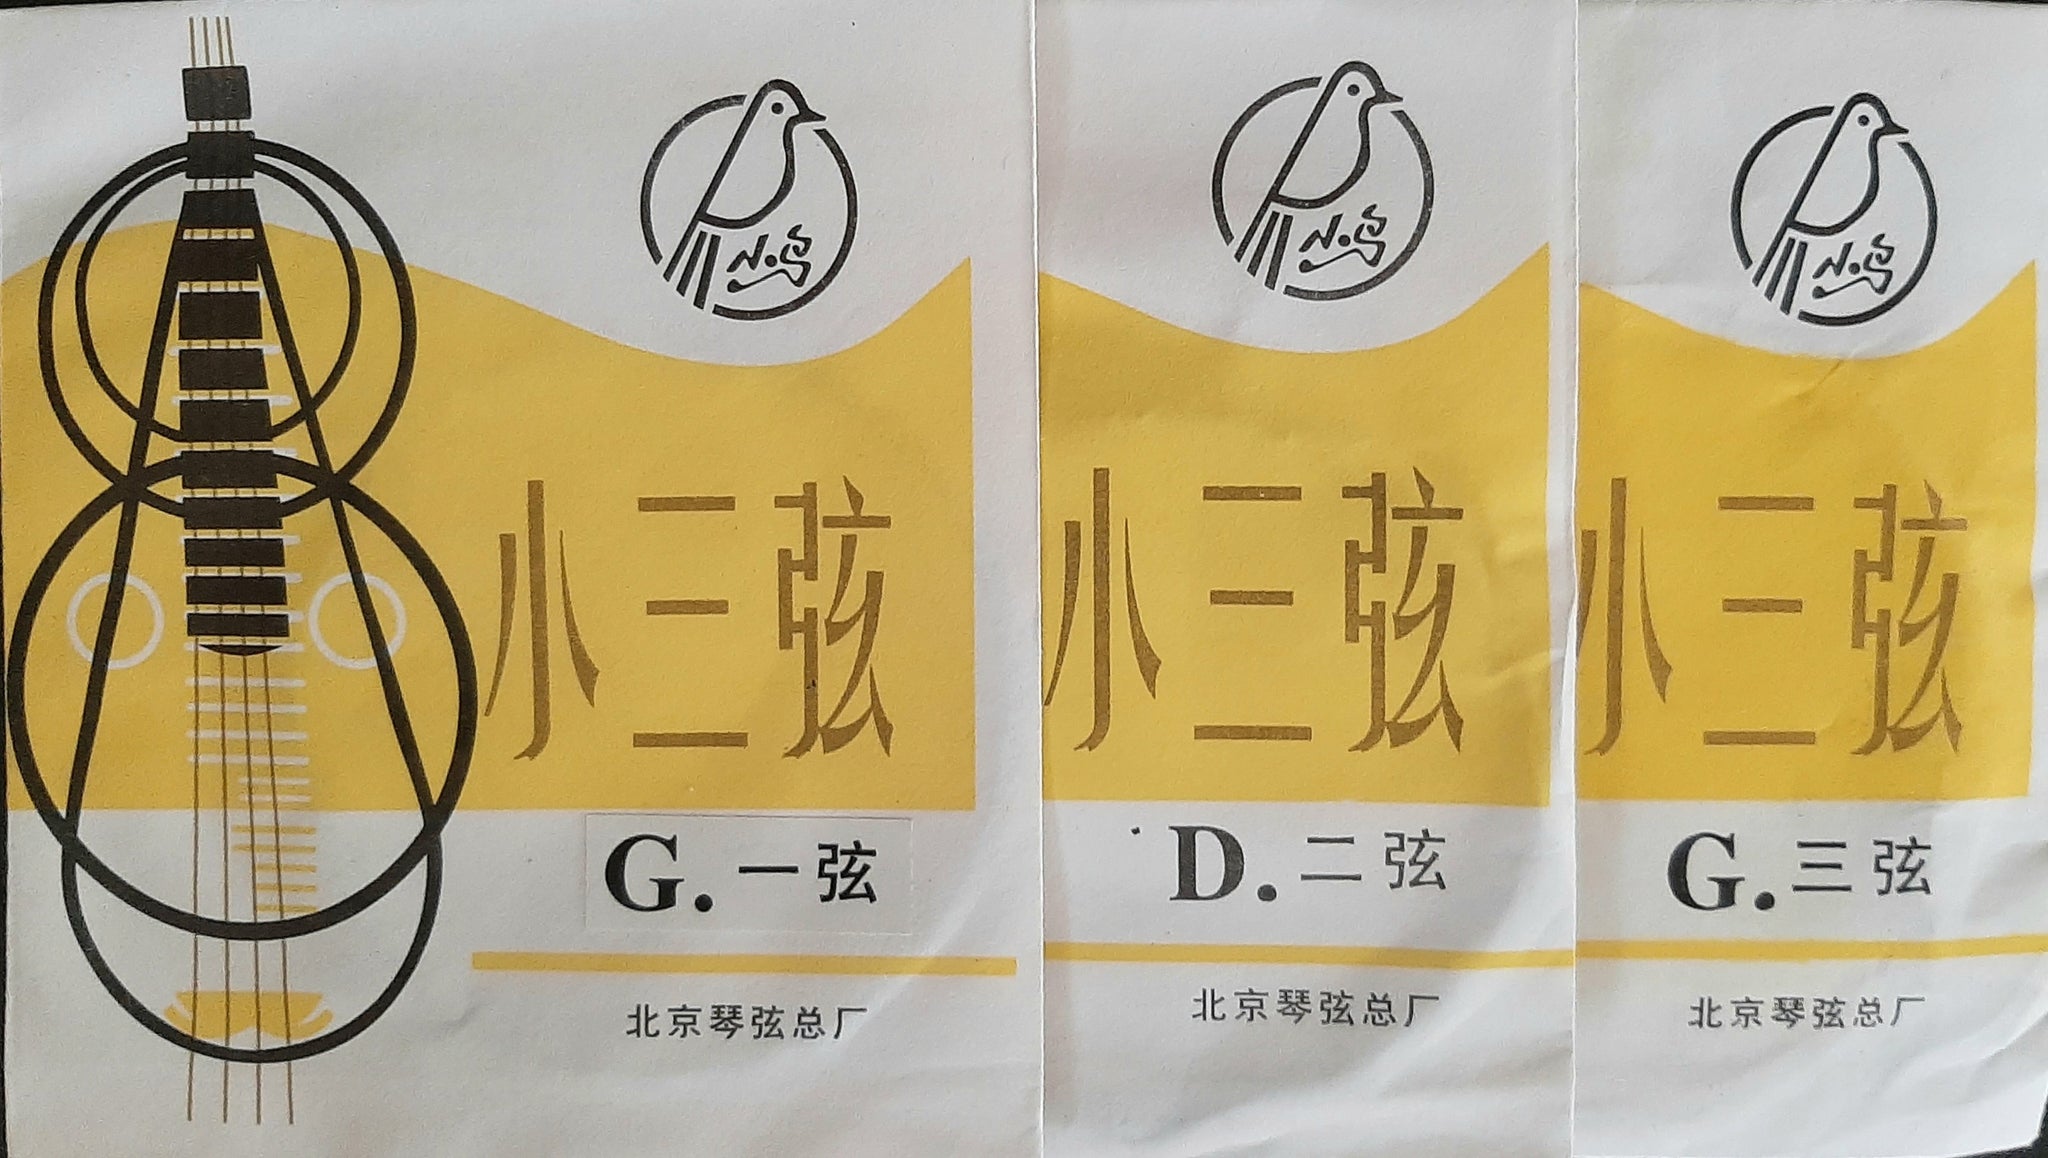 Strings for Xiao-SanXian (Three-stringed, small sanxian), whole set (3 pieces) 小三弦的弦 一套（3根）Free shipping